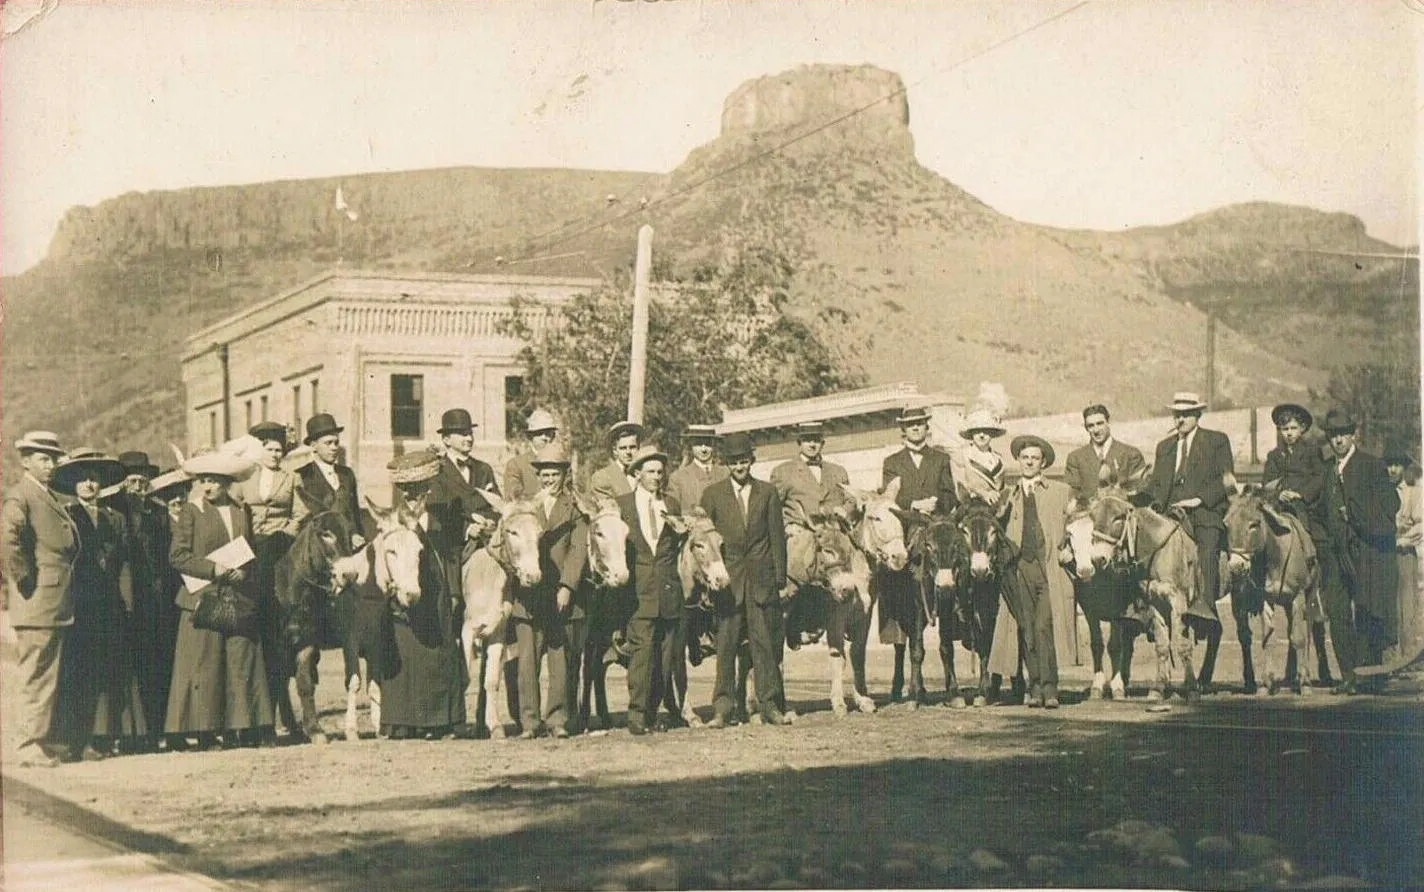 A wide group of circa-1910 tourists, about 11 seated on burros and the rest on foot.  Castle Rock in the background.